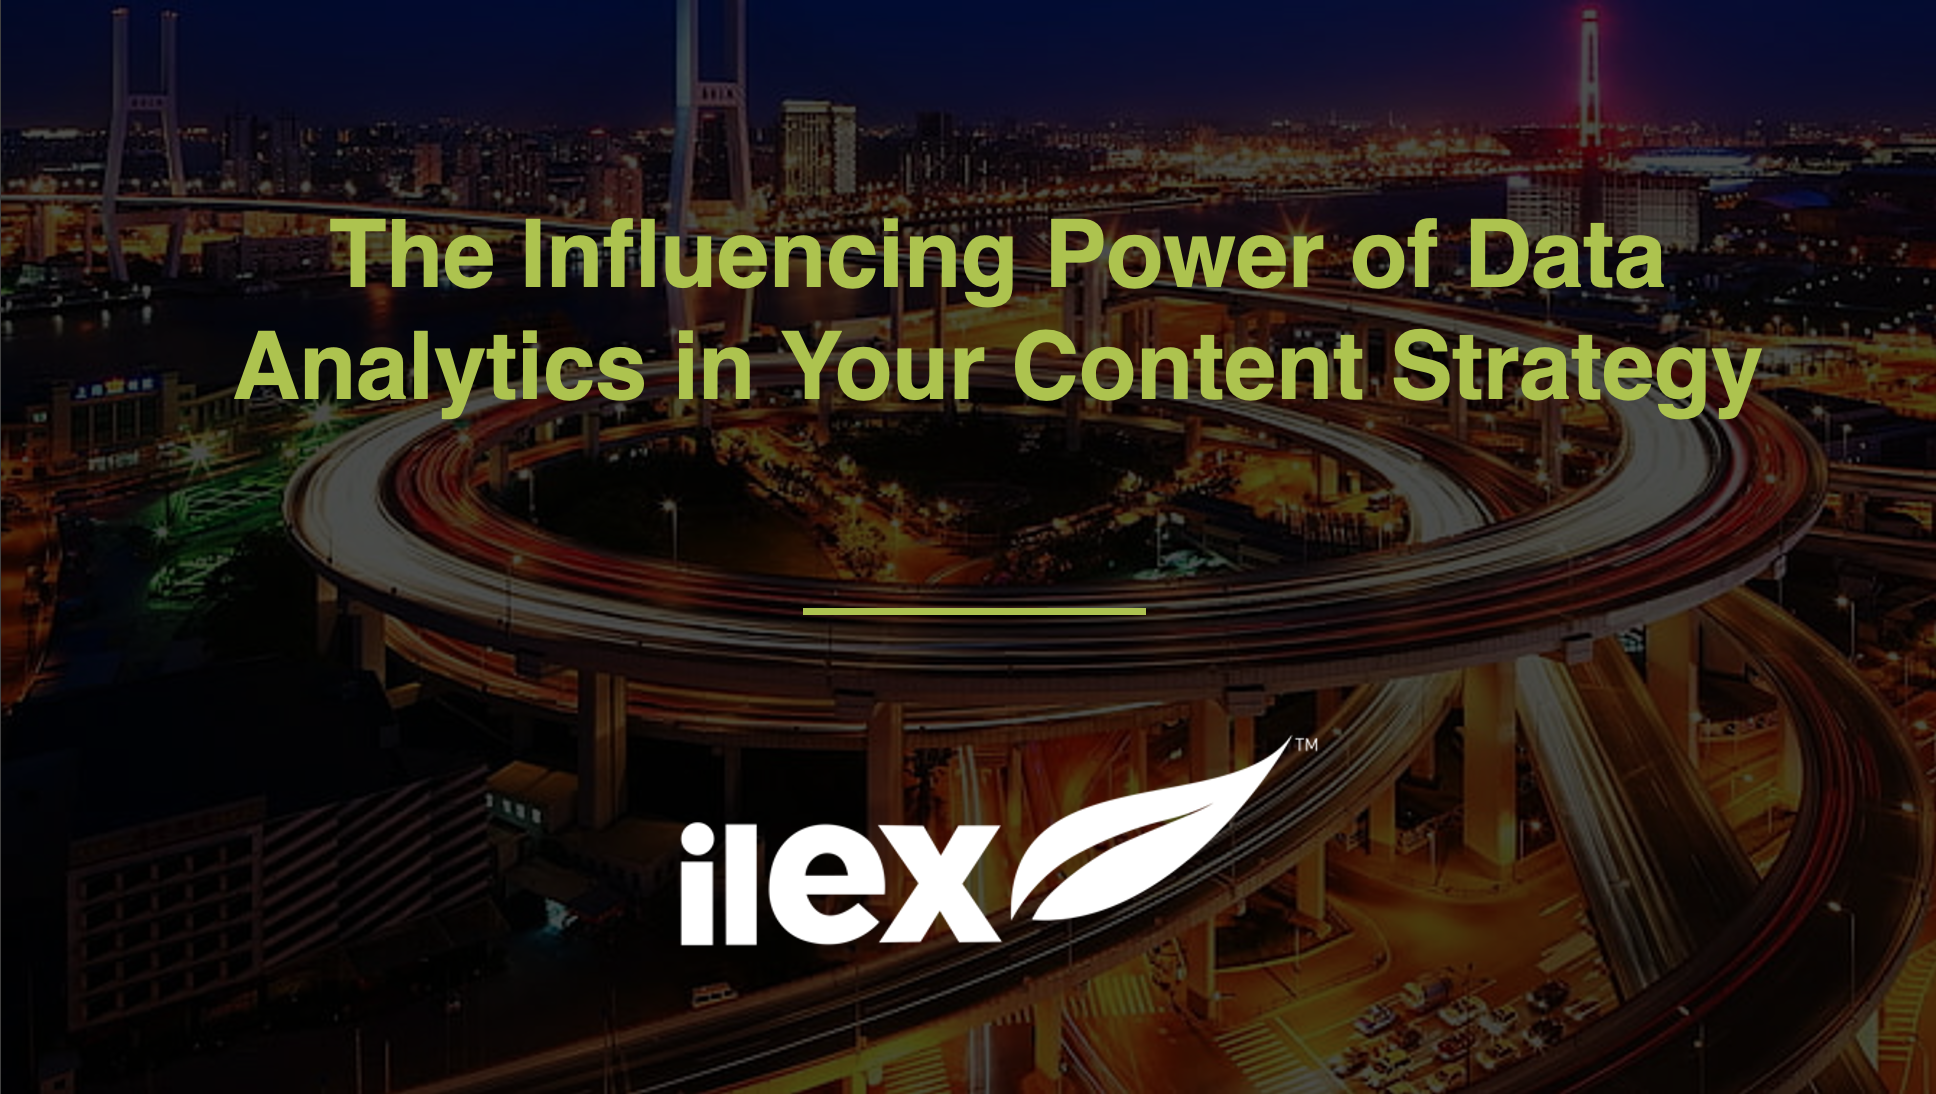 THE INFLUENCING POWER OF DATA ANALYTICS IN YOUR CONTENT STRATEGY